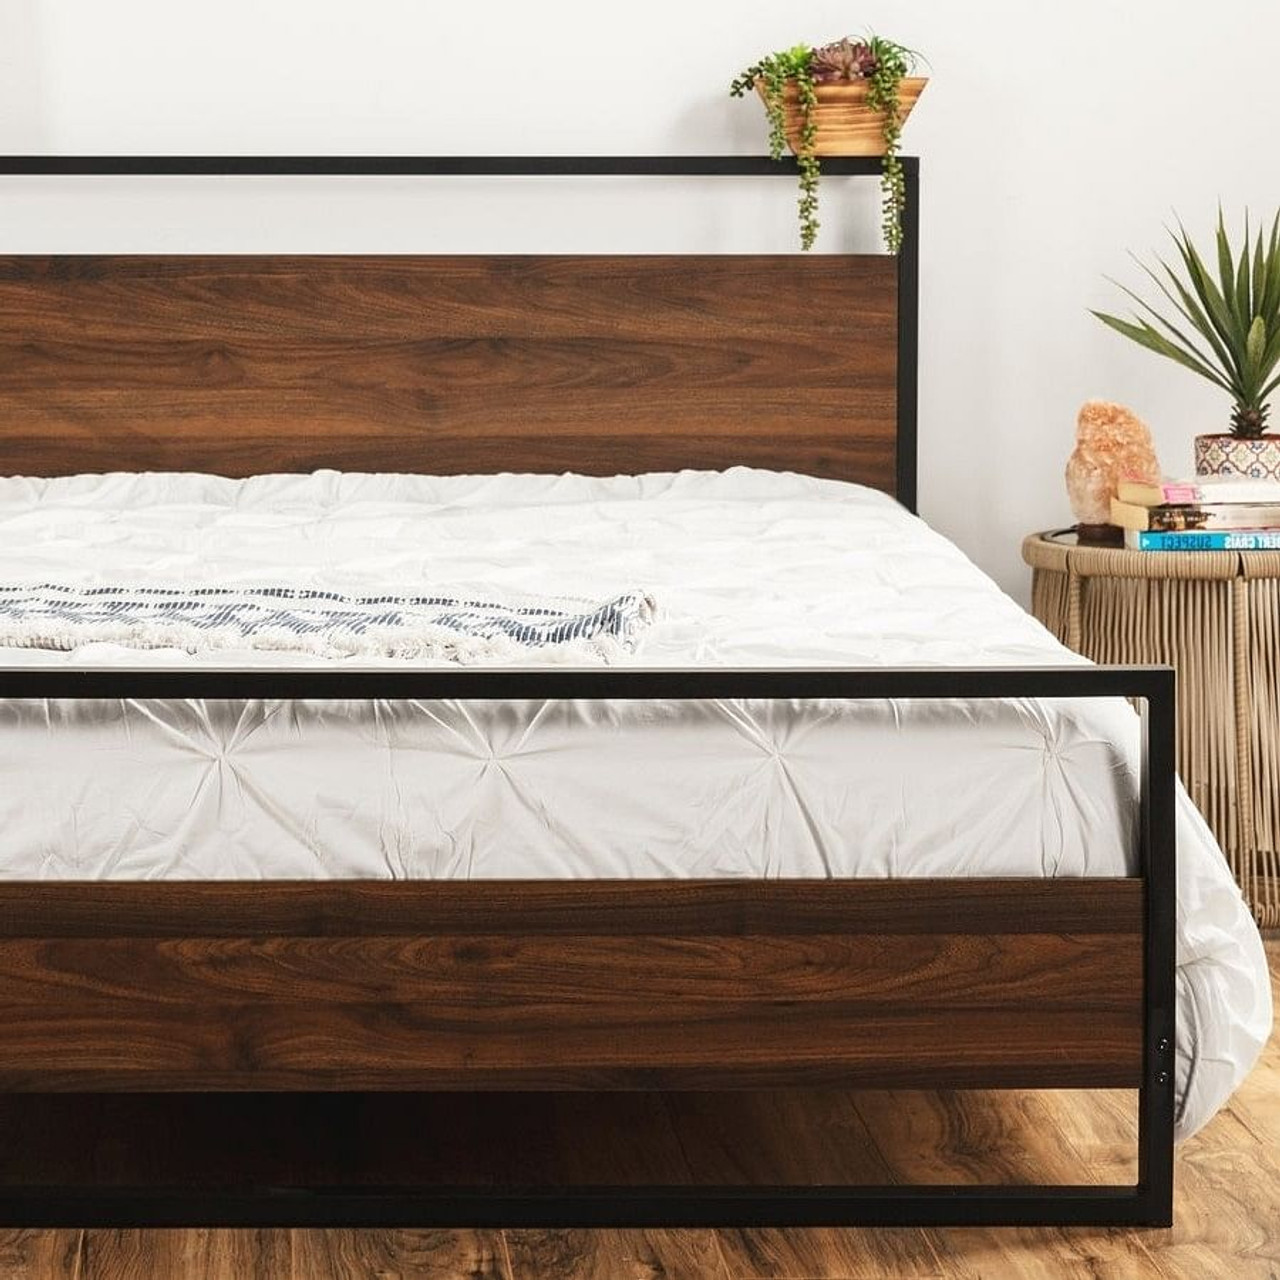 Queen size Farmhouse Metal Wood Platform Bed Frame with Headboard Footboard